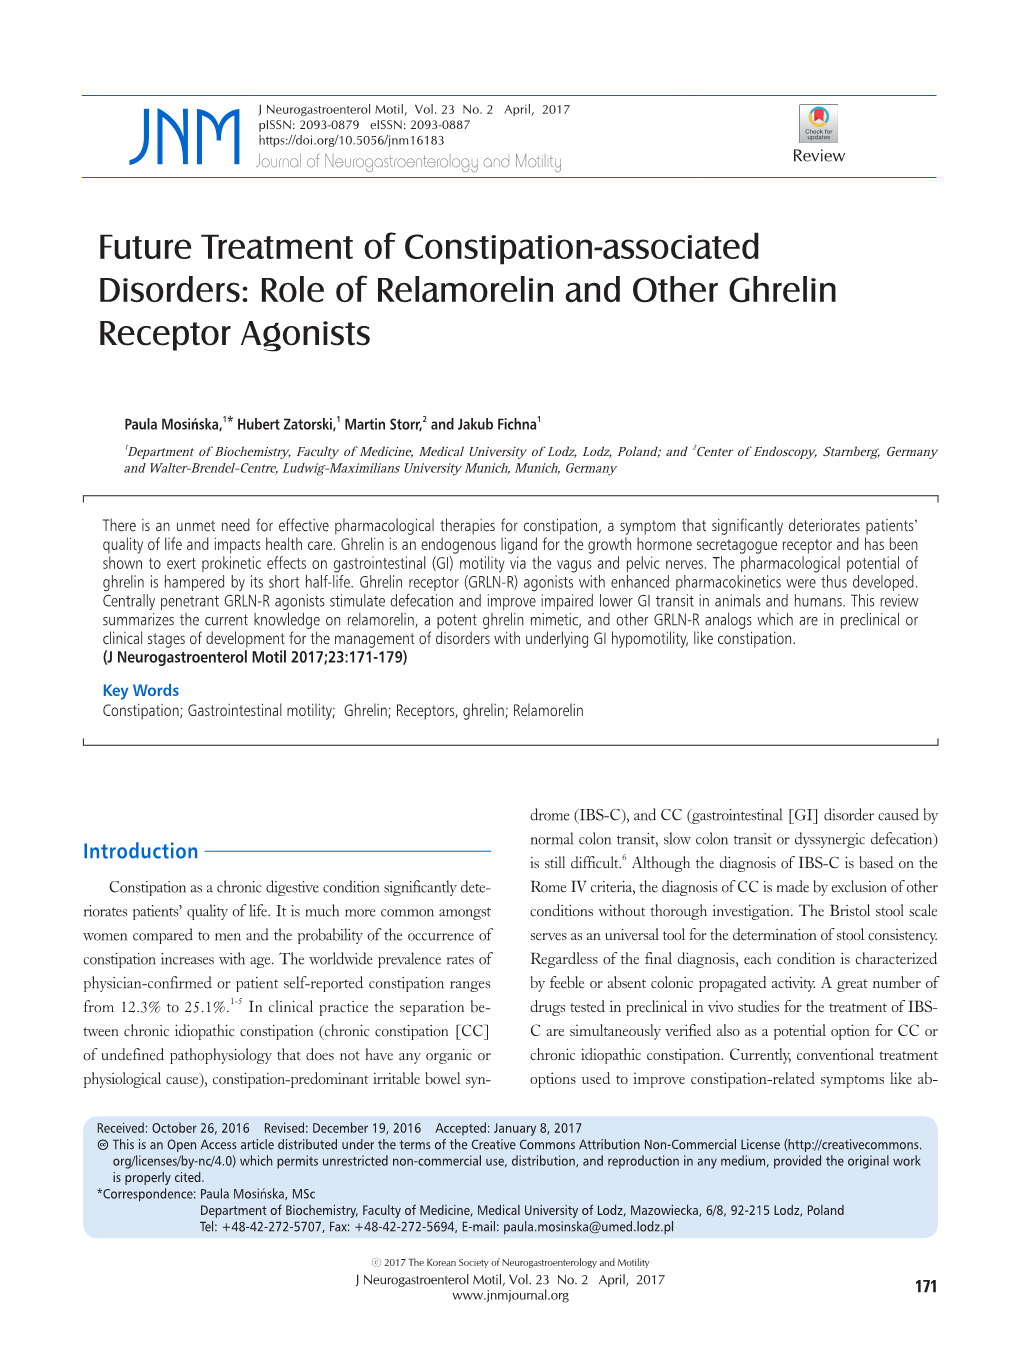 Future Treatment of Constipation-Associated Disorders: Role of Relamorelin and Other Ghrelin Receptor Agonists